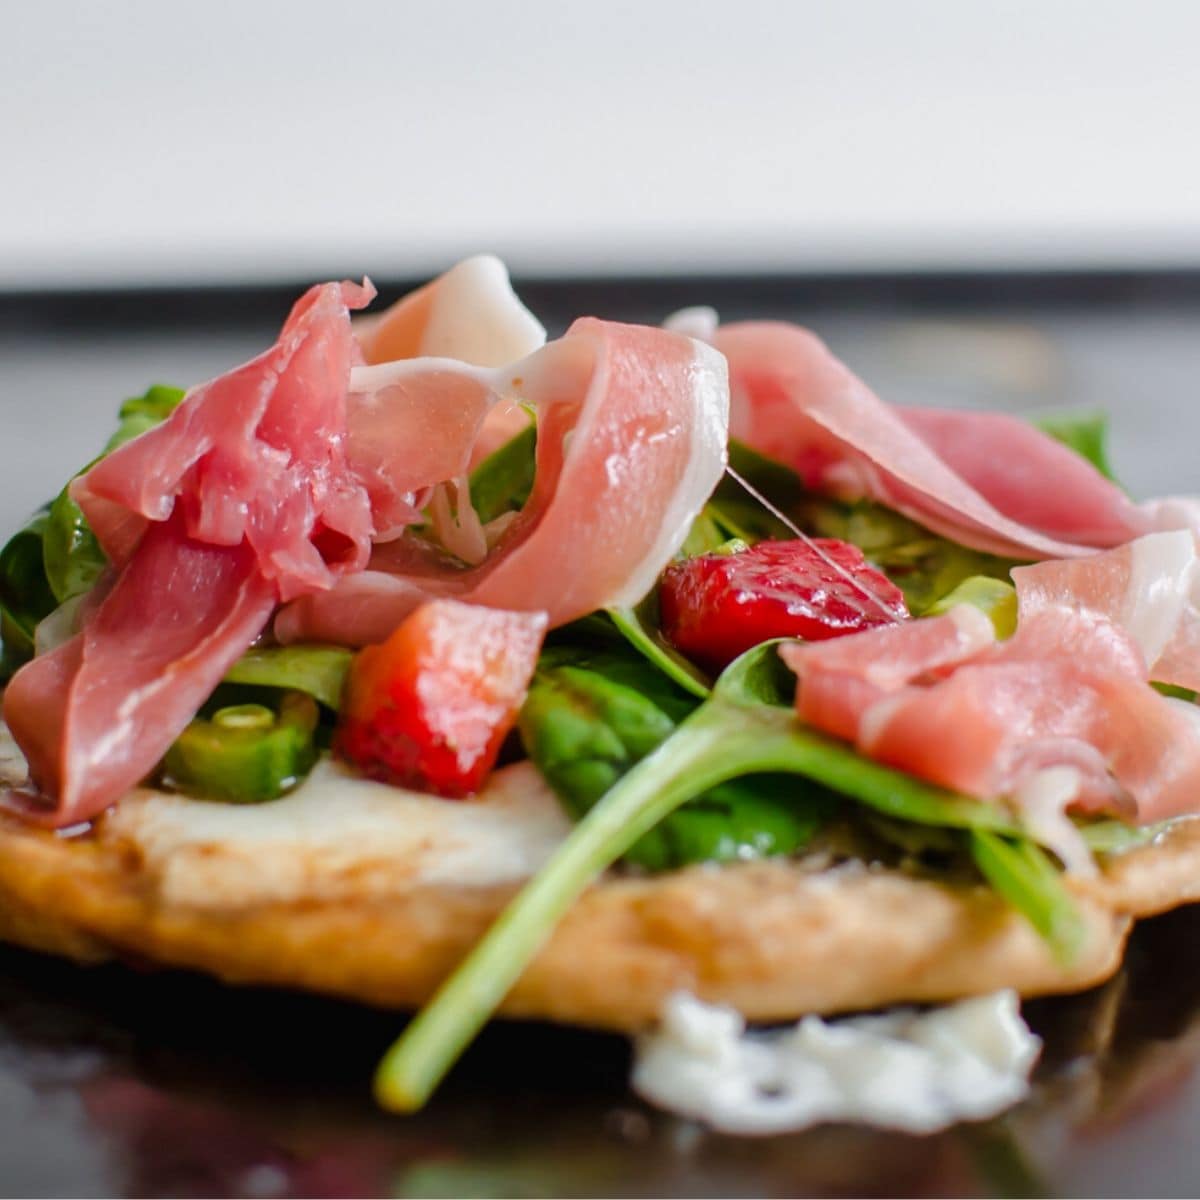 Side view of a mini salad pizza with greens, prosciutto, and asparagus on mozzarella.